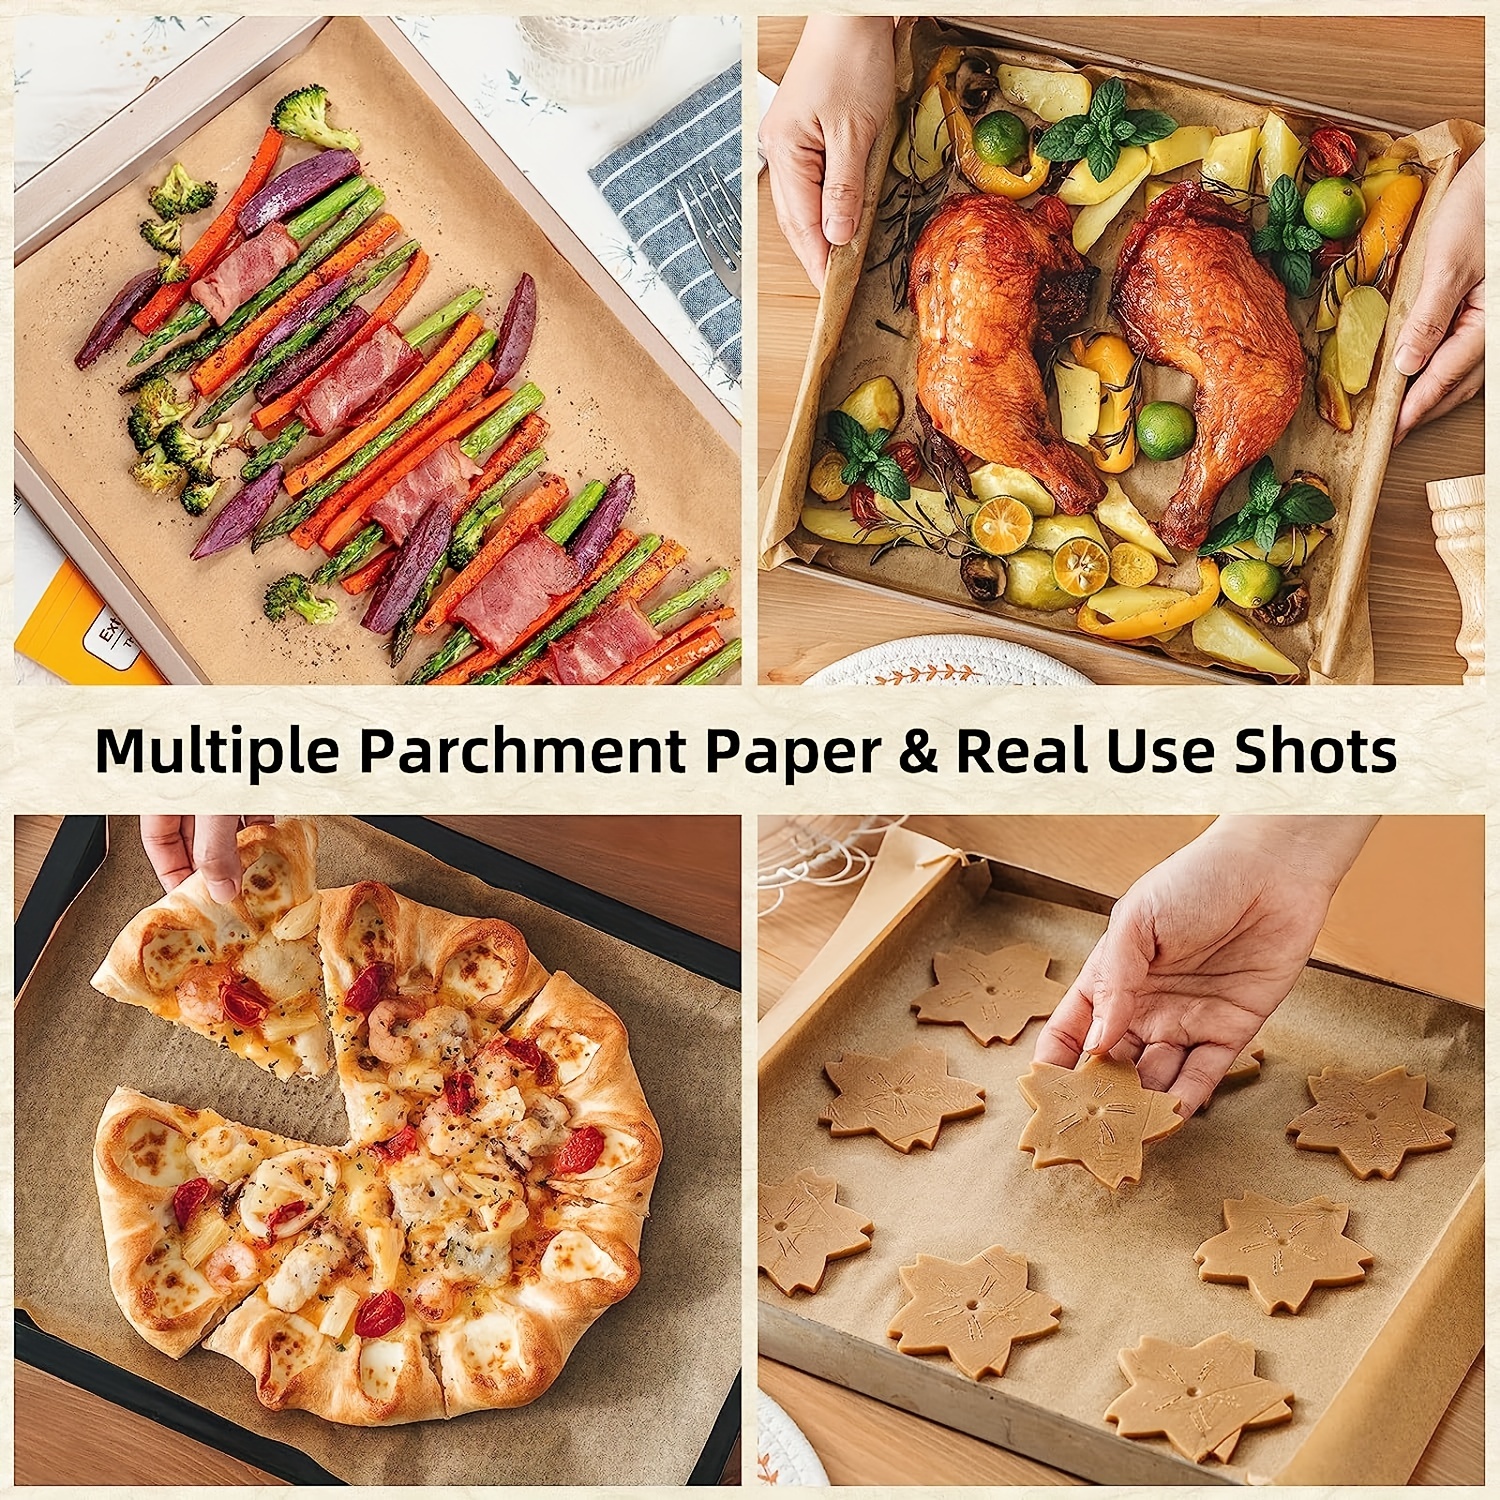 Pre-cut Parchment Paper Sheets for Baking and Cooking